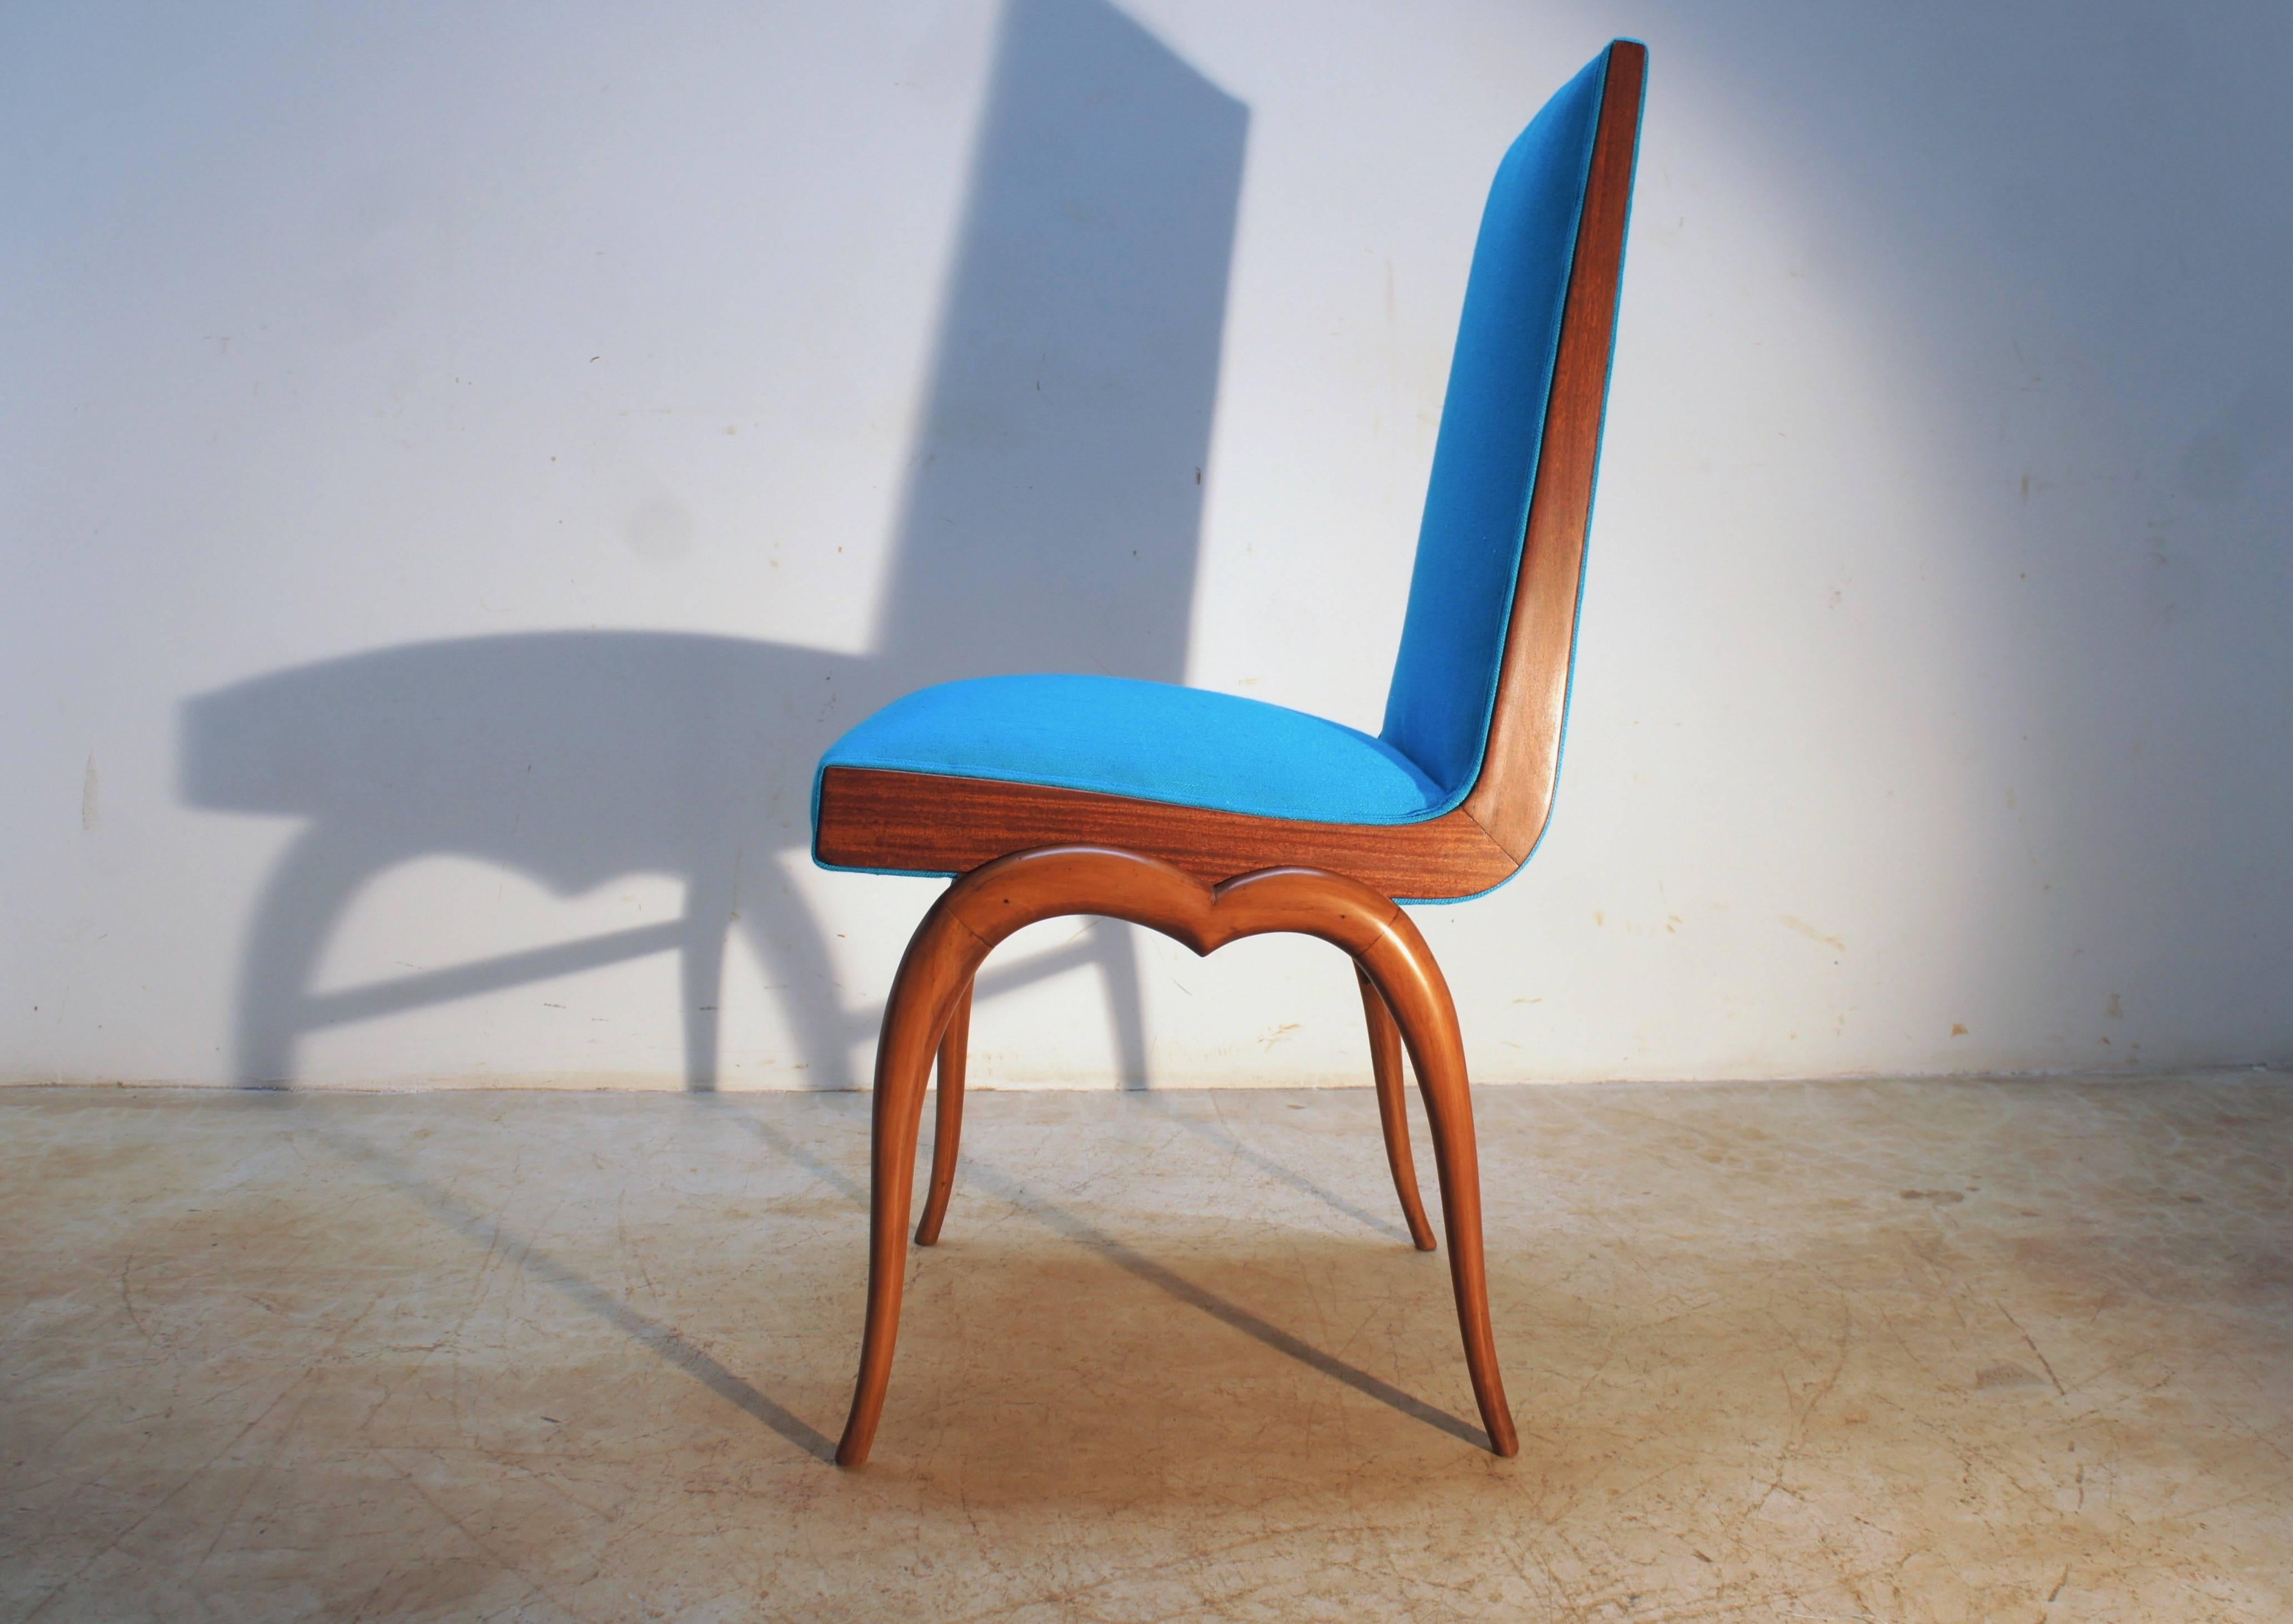 Set of eight Giuseppe Scapinelli blue chairs made of golden caviuna wood. This chairs were designed and produced in a very small quantity in the mid-1950s by the Italian born Brazilian architect and designer Giuseppe Scapinelli. The last of the